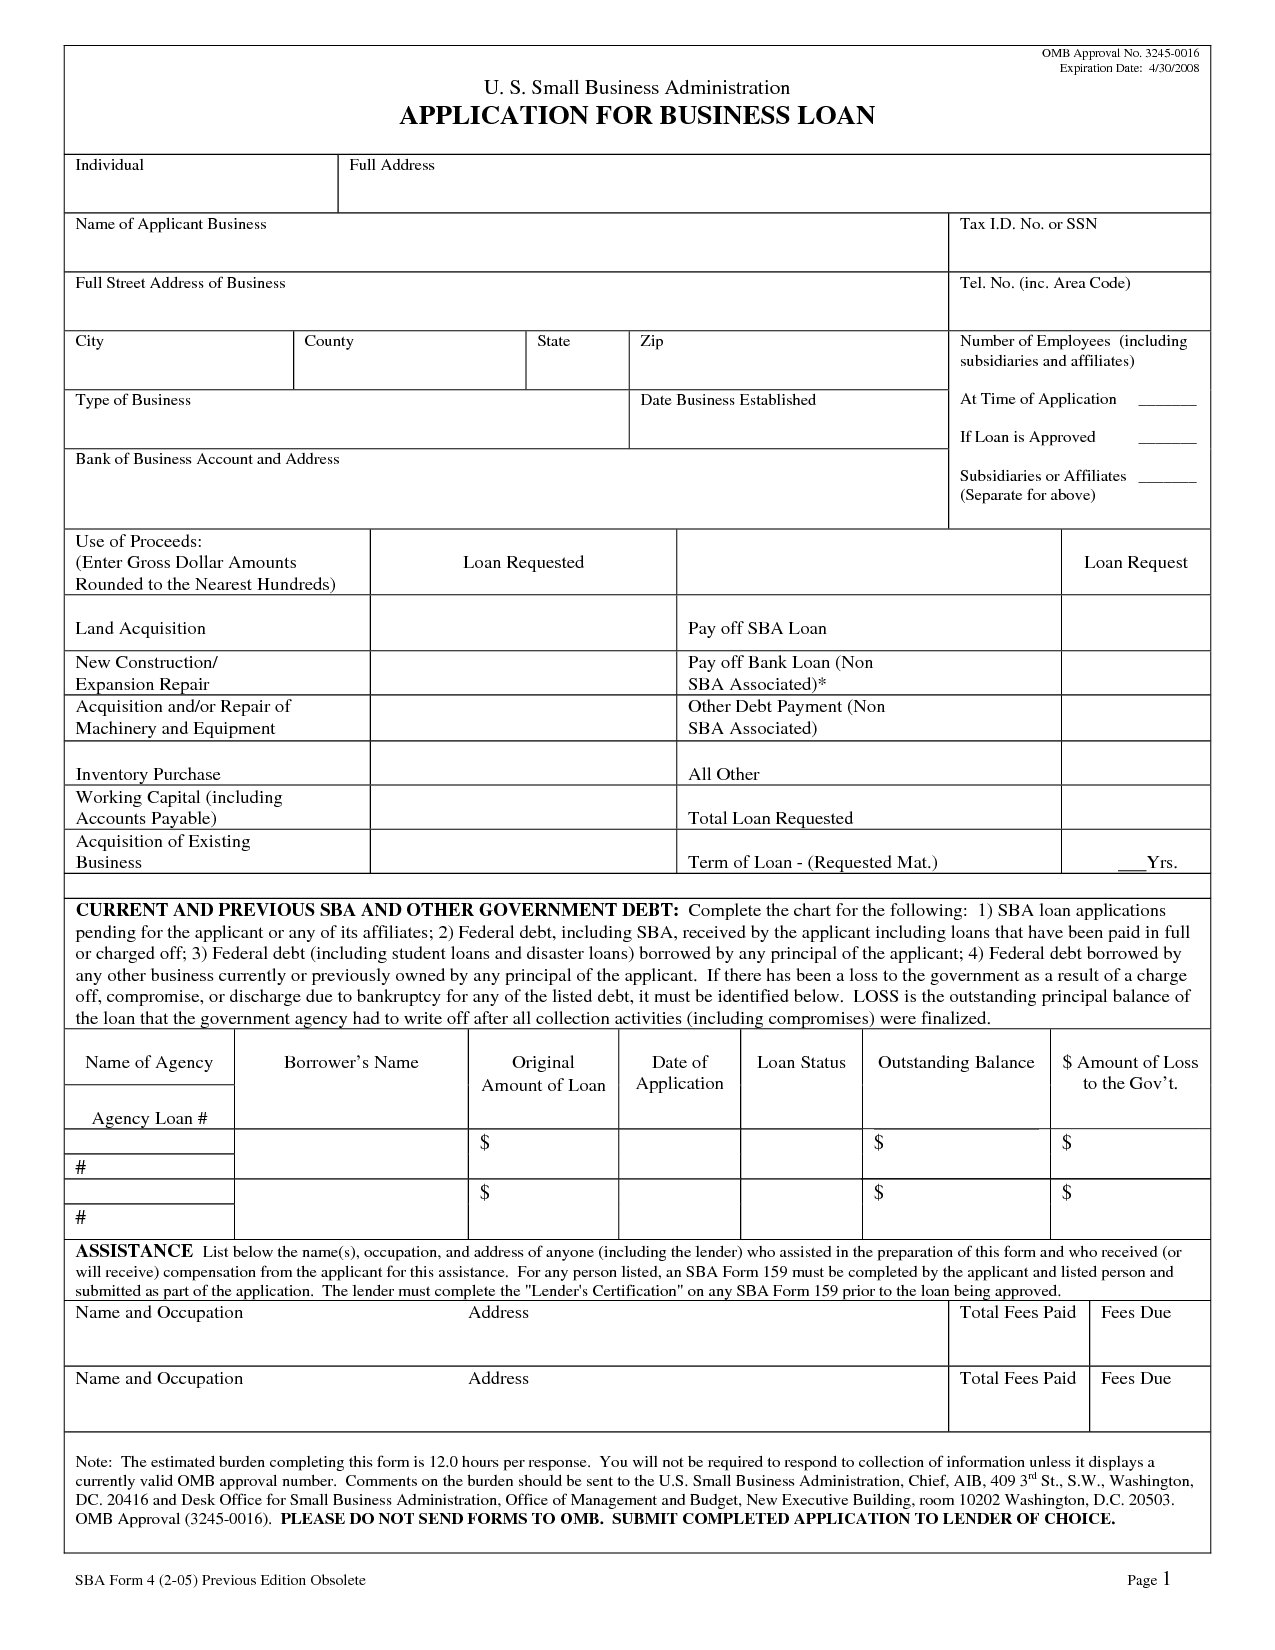 Business Loan Application Form - Free Printable Documents